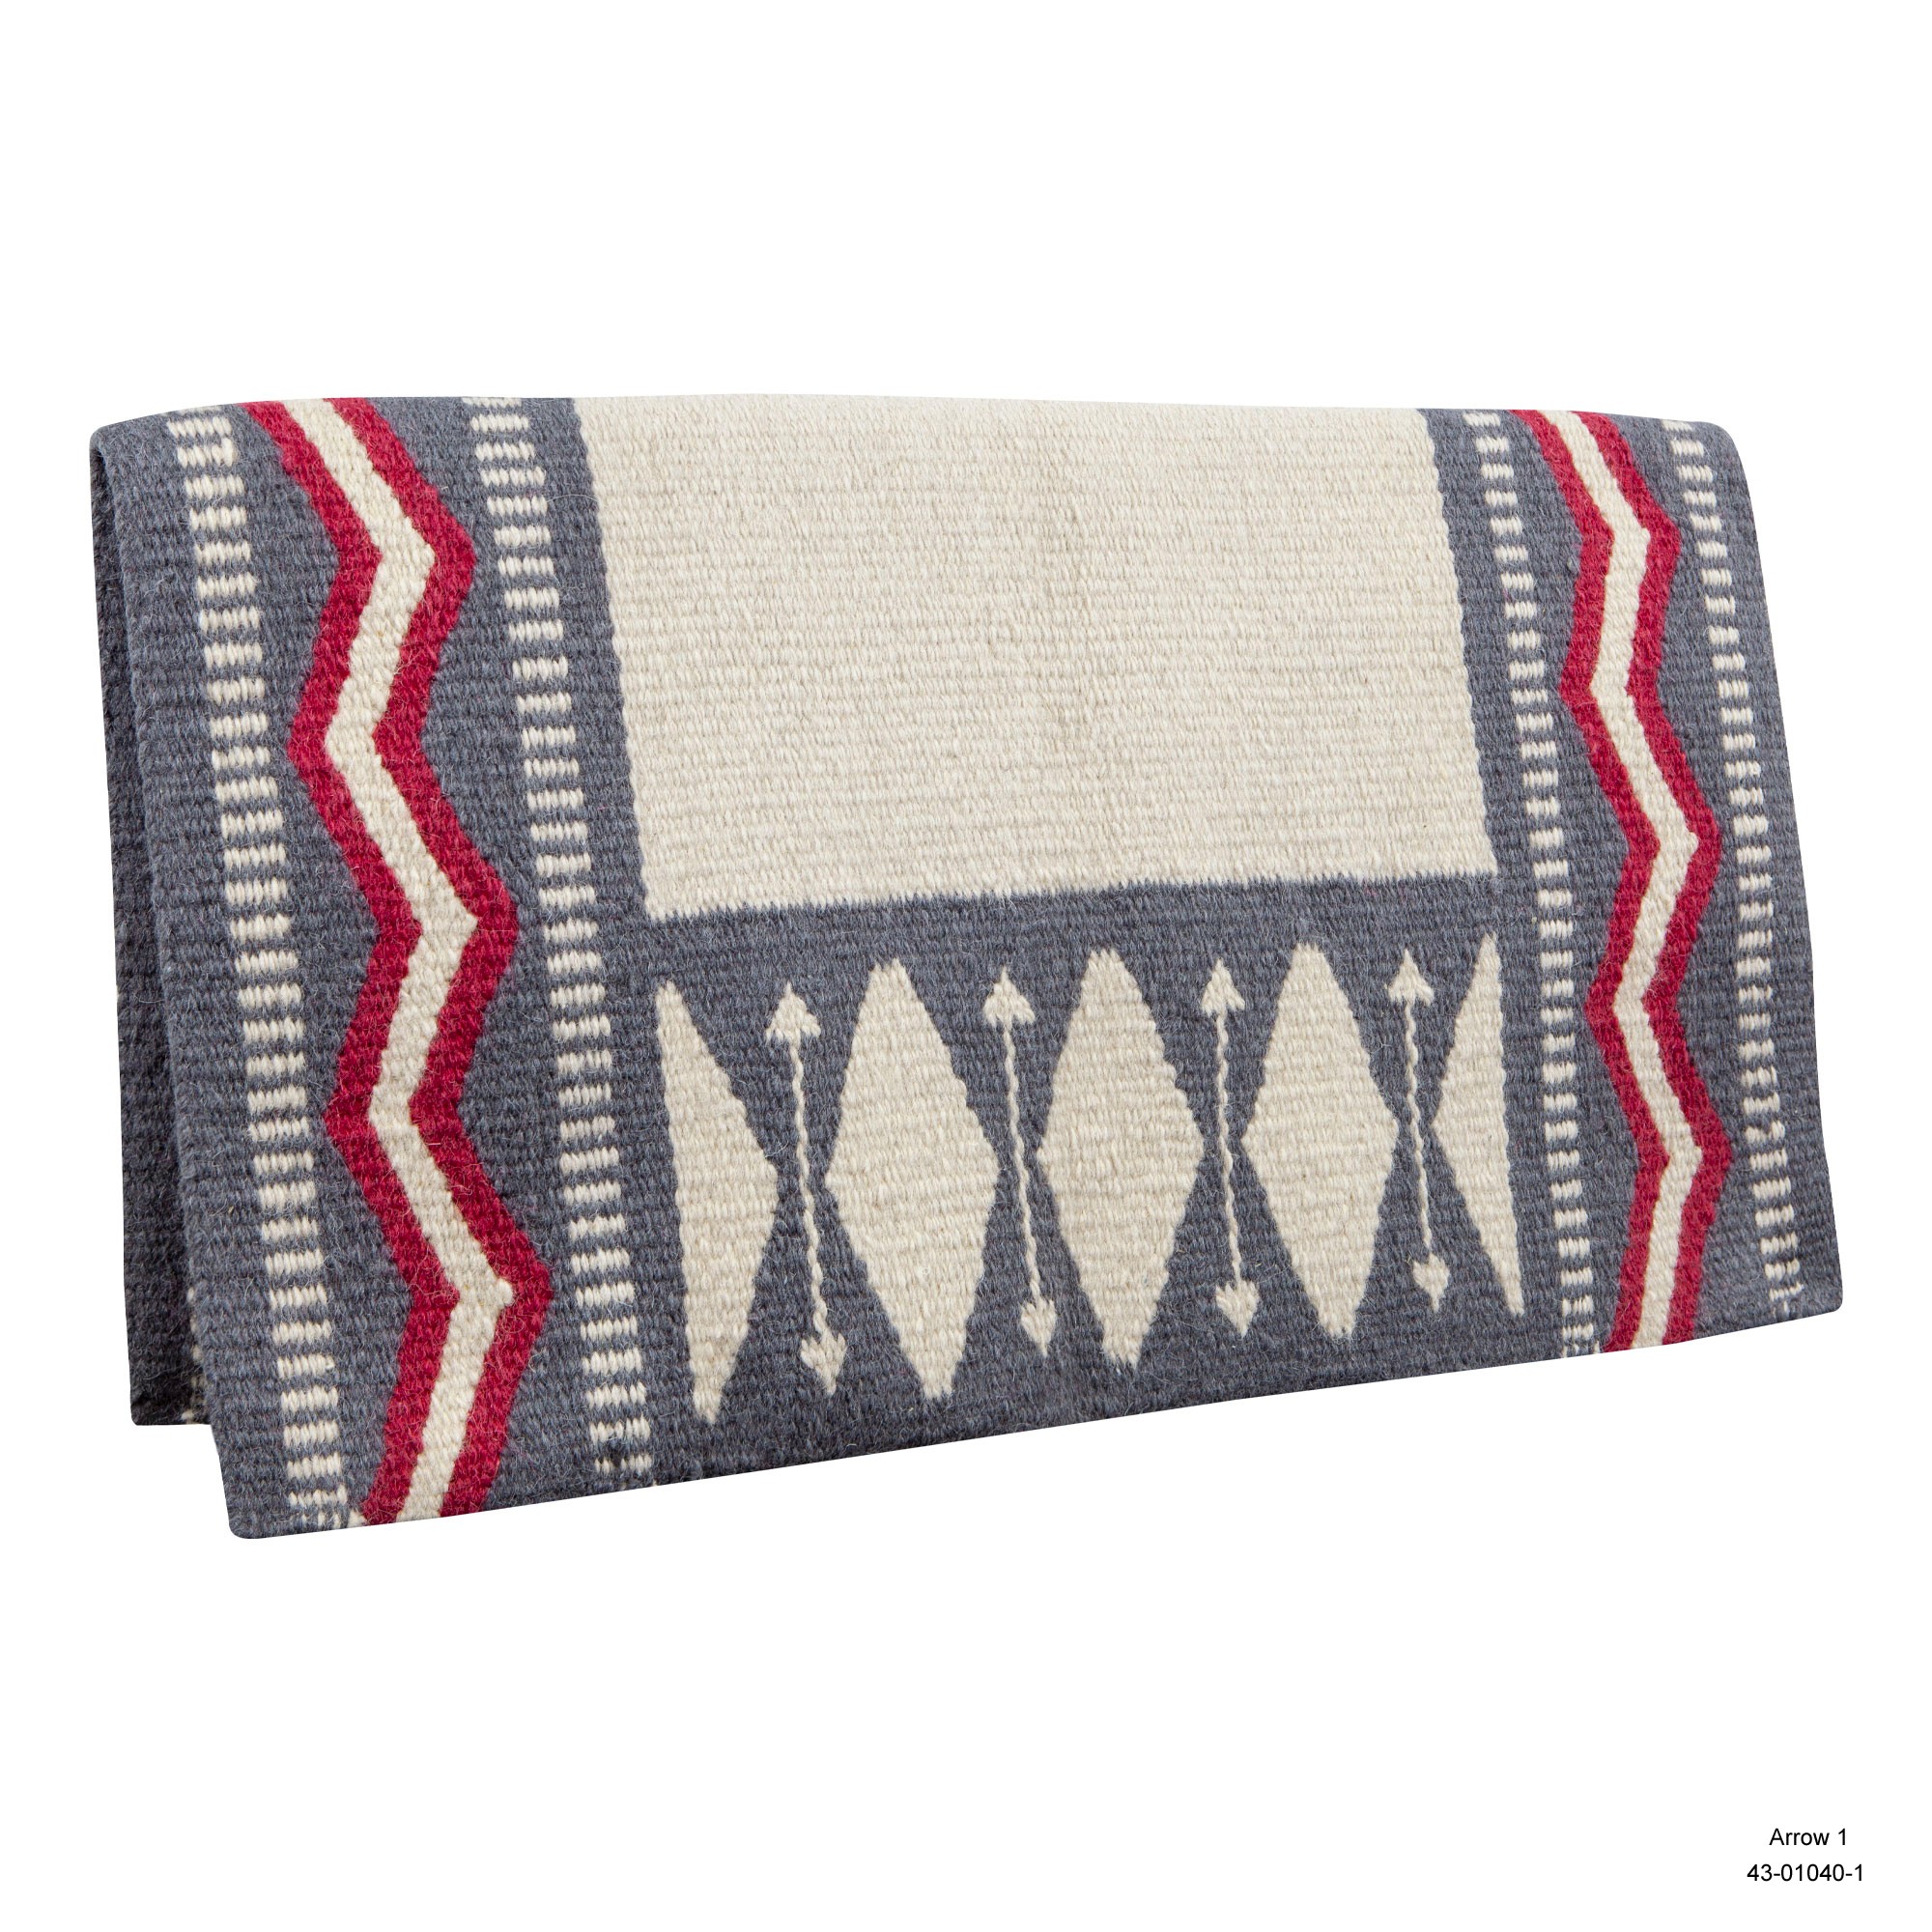 Arrow Woven Show Blanket, gray-red